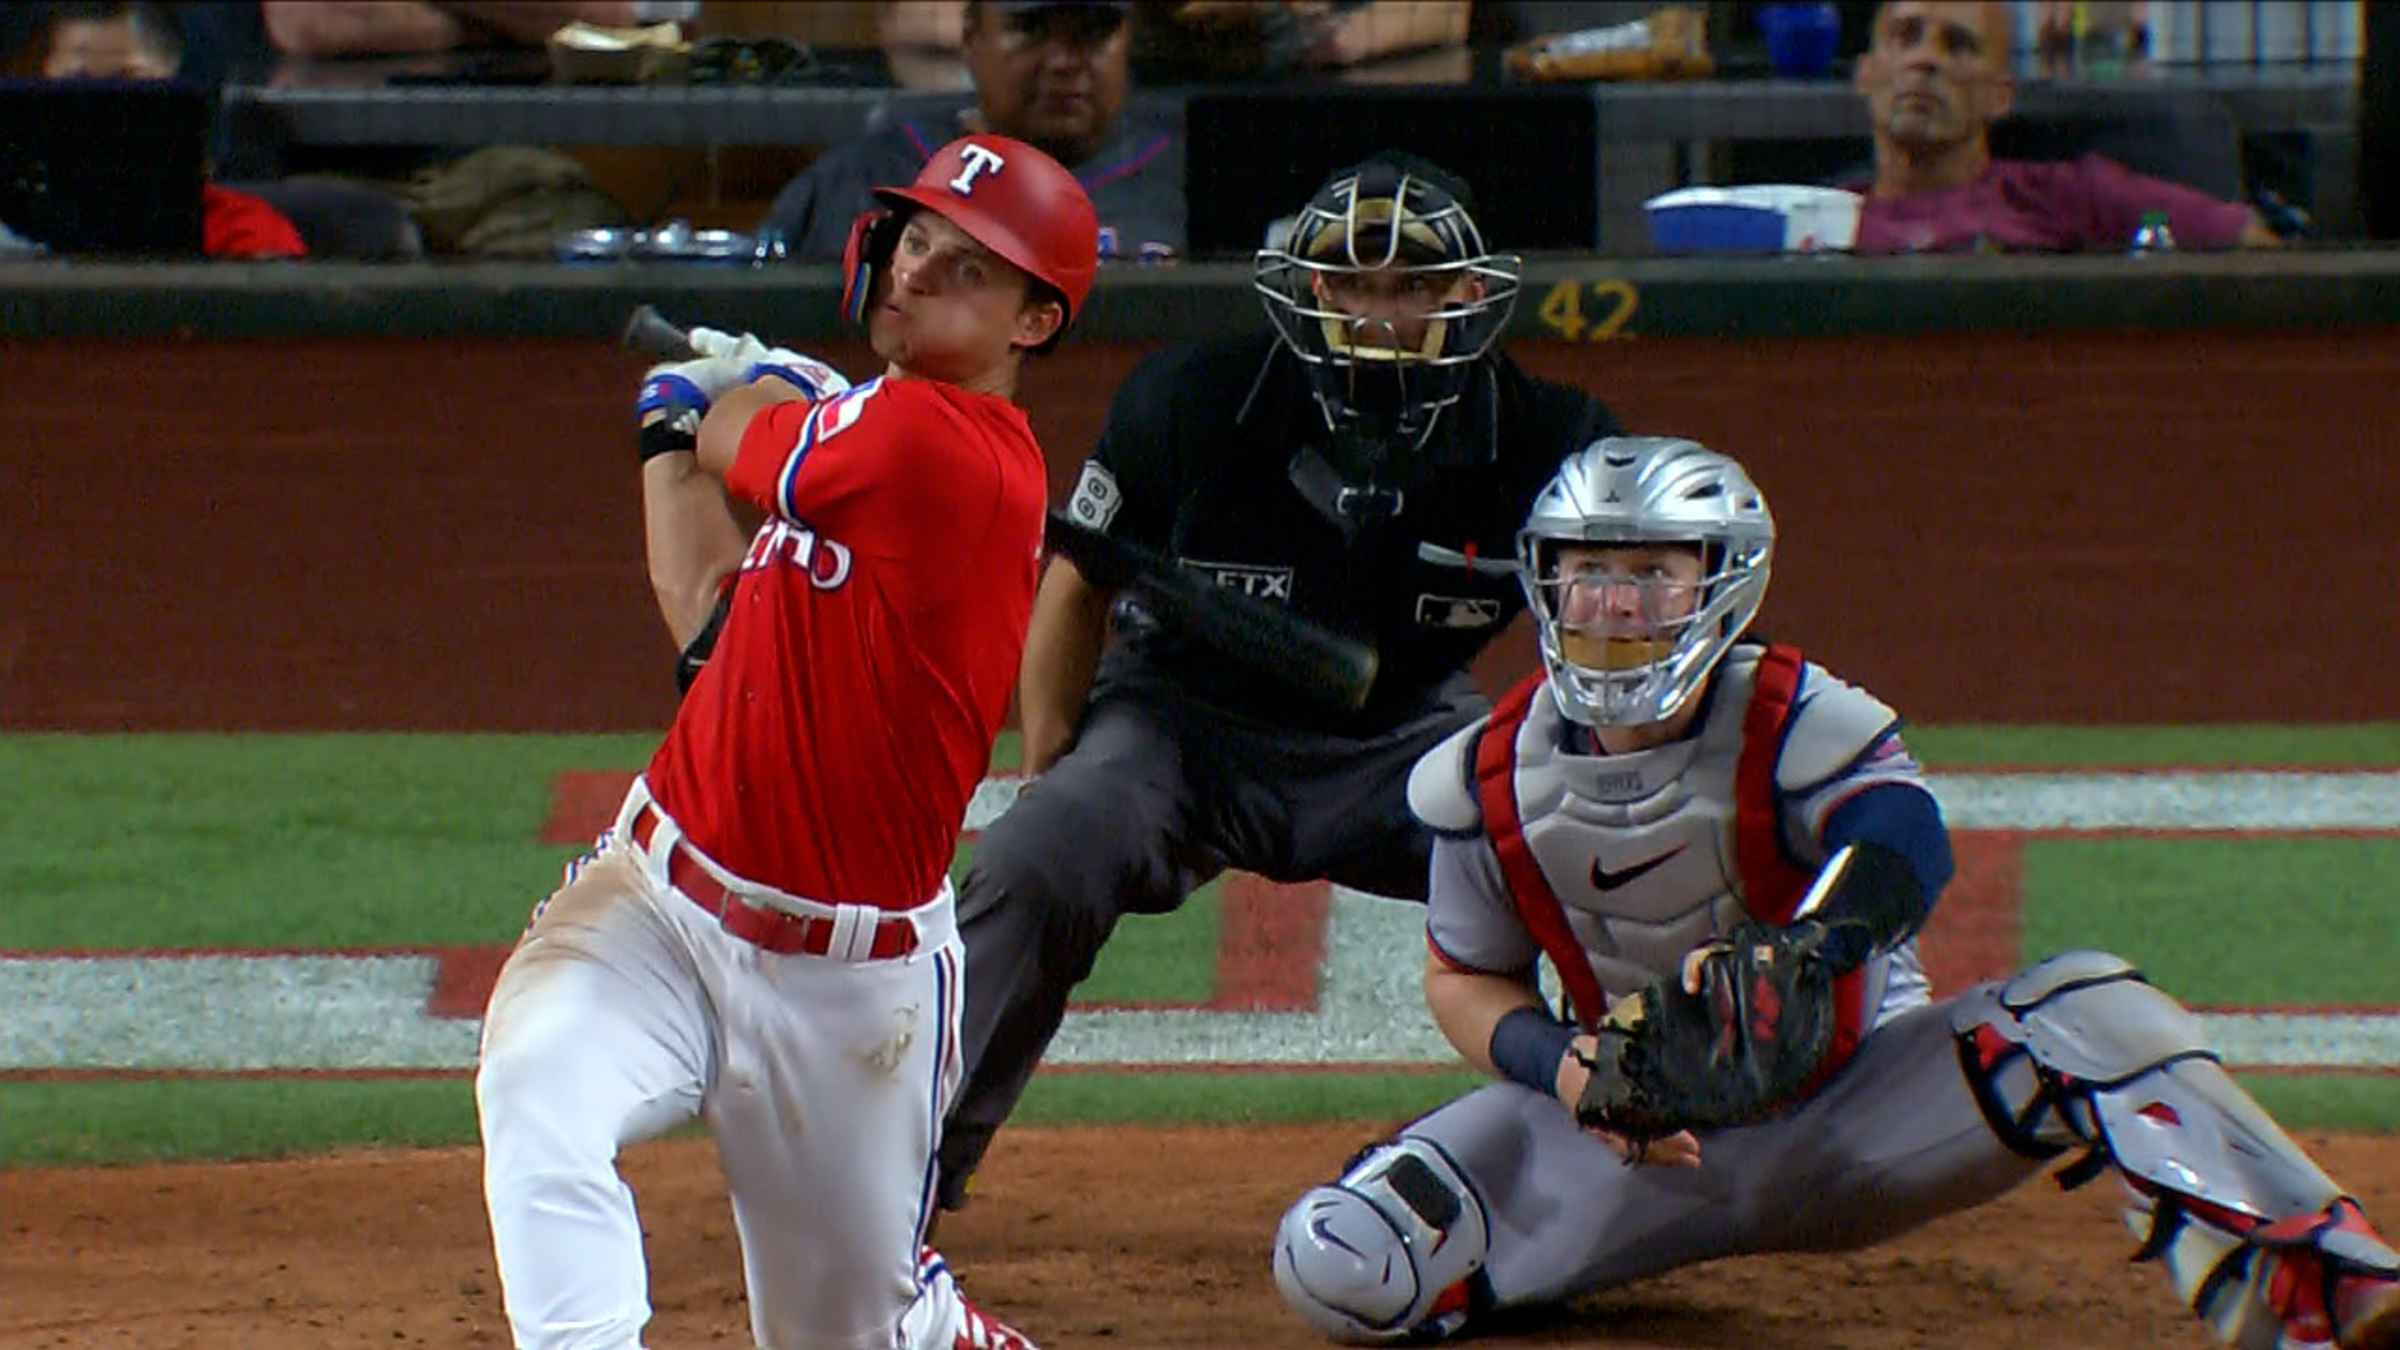 All-Star SS Corey Seager activated from IL after Rangers went 3-6 without  him, homers in 1st AB